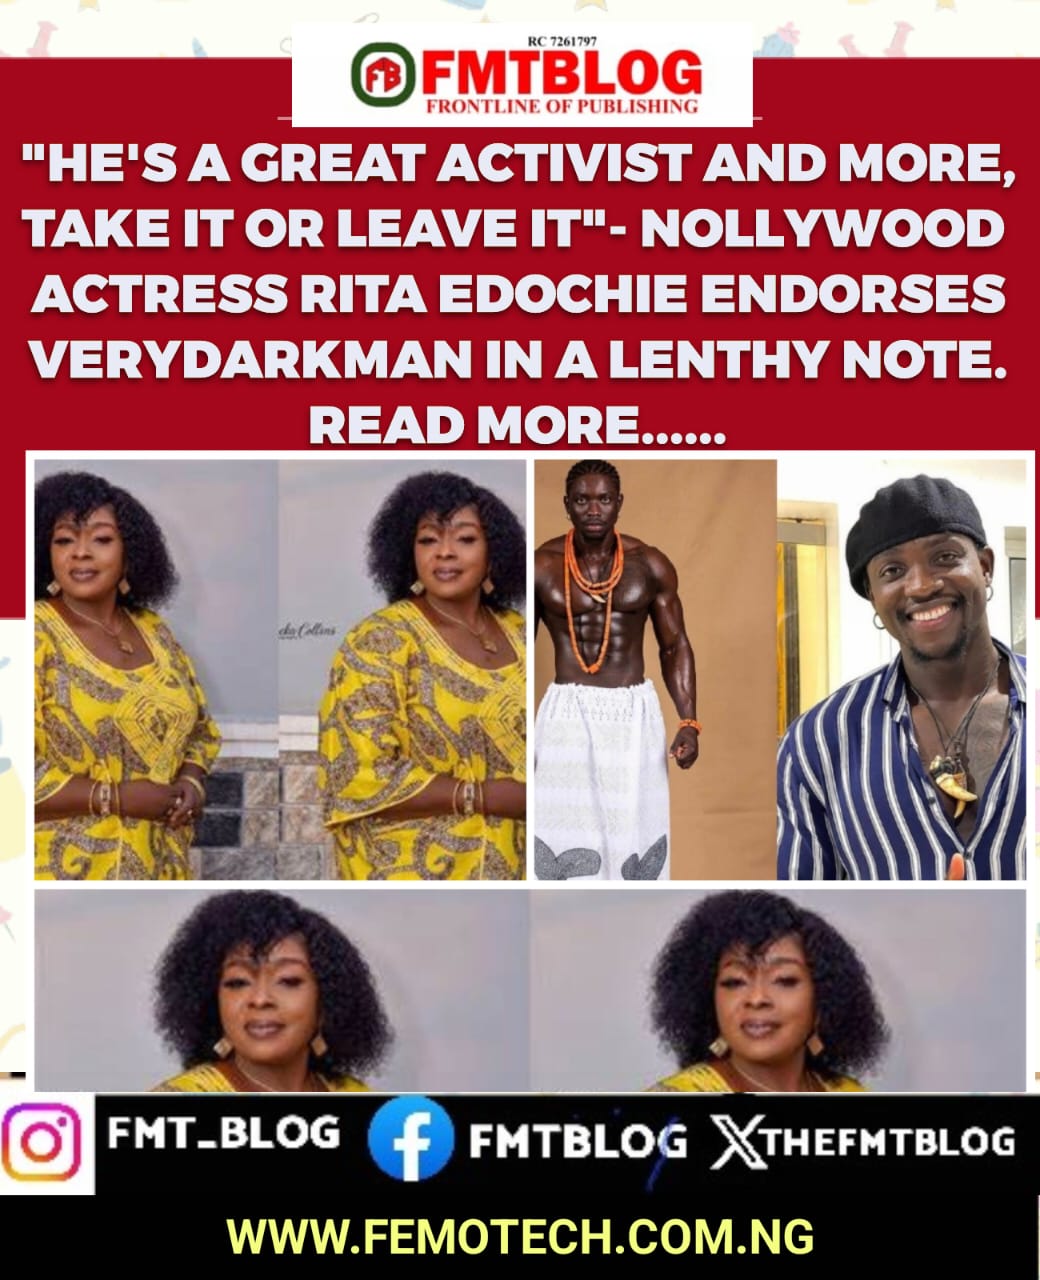 ”He Is A Great Activist And More, Take It Or Leave It”- Nollywood Actress Rita Edochie Endorses VeryDarkMan In A Lengthy Note